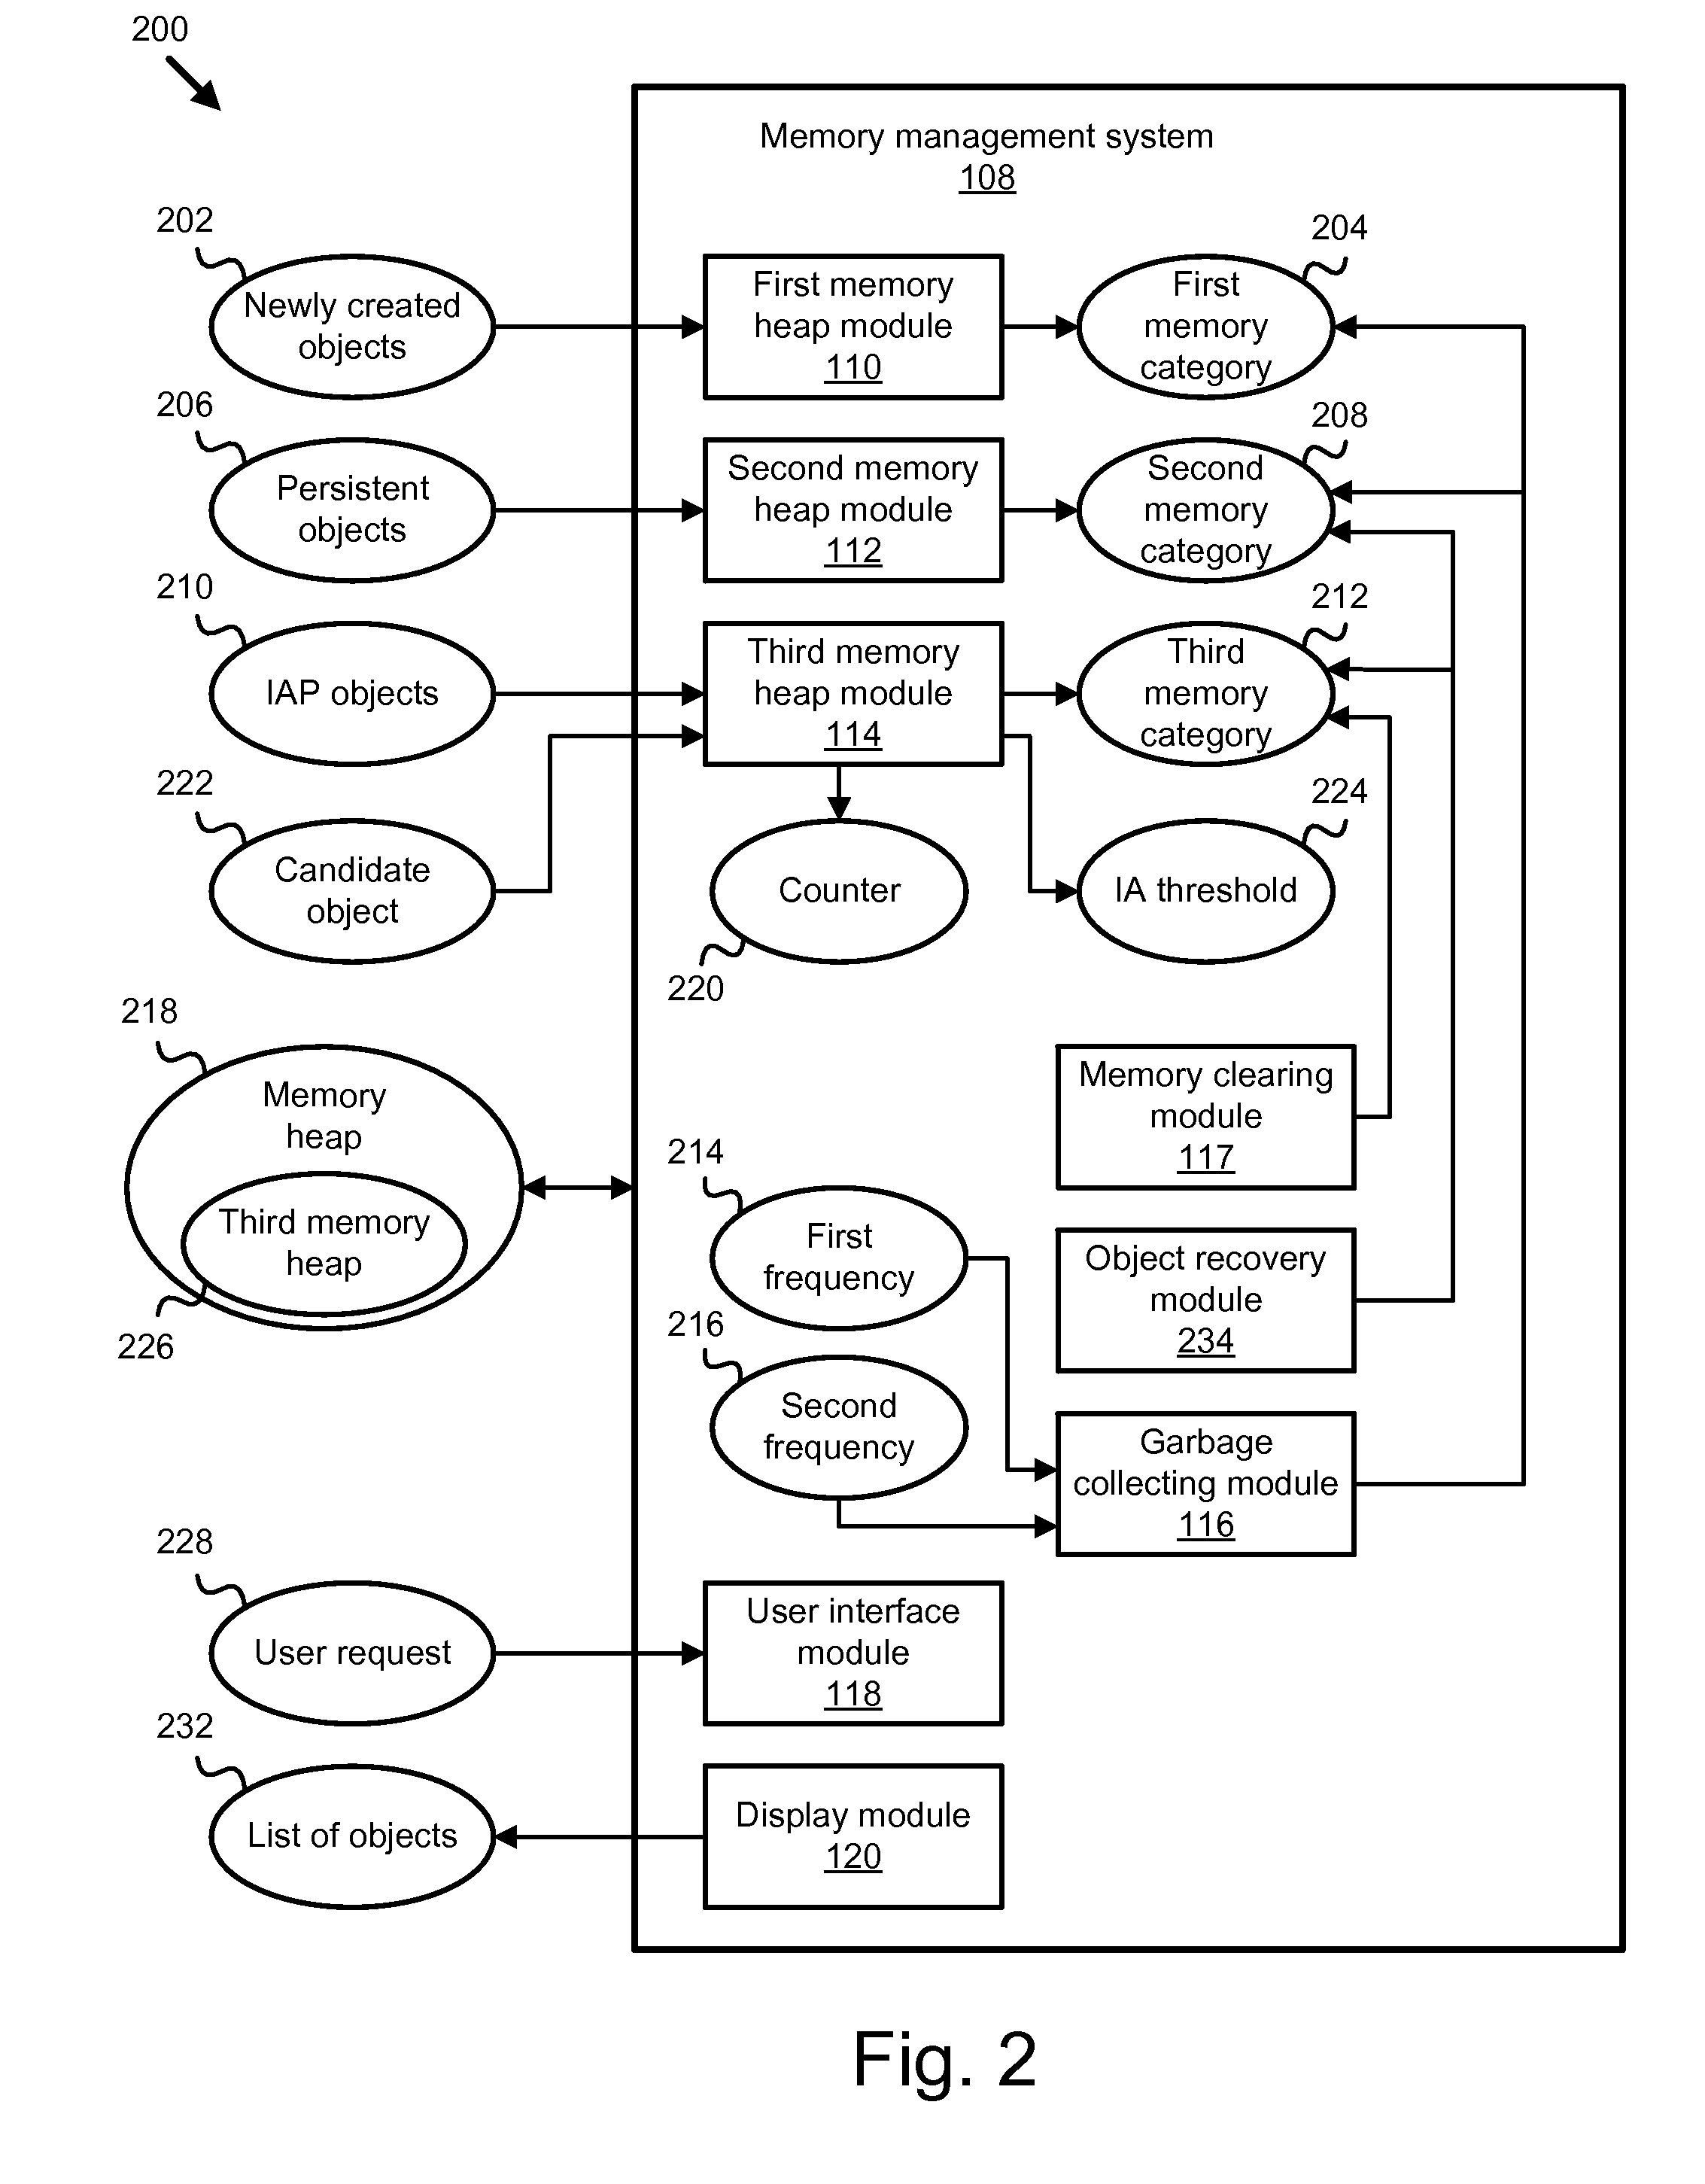 Apparatus, system, and method for improving system performance in a large memory heap environment